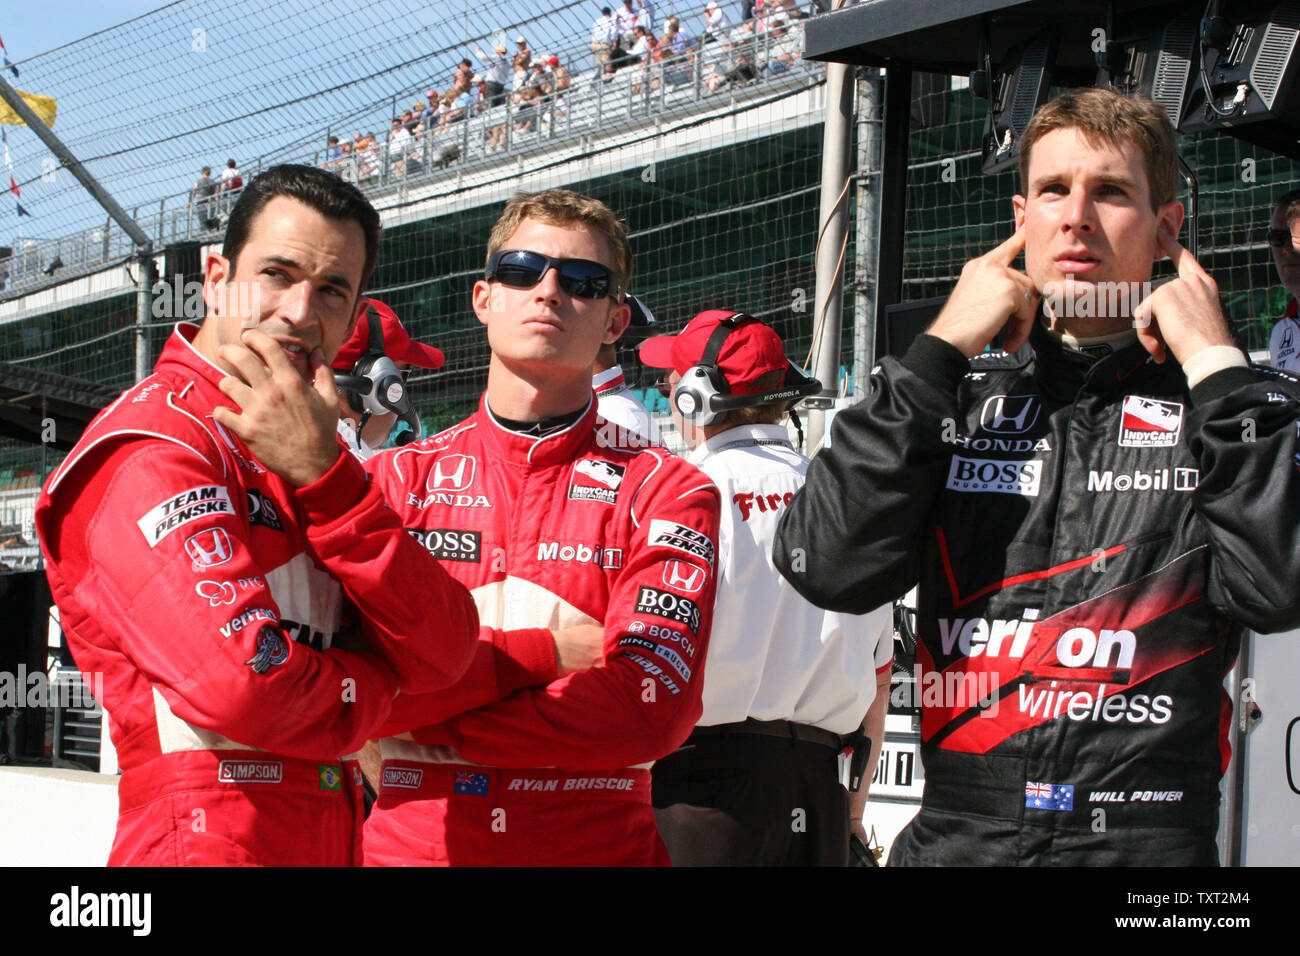 Team Penske drivers Helio Castroneves, Ryan Briscoe and Will Power seem to be posing the 'Speak no Evil, See no Evil, Hear no Evil during practice for the final weekend of qualifications on May 14, 2009 at the Indianapolis Motor Speedway in Indianapolis, Indiana. (UPI Photo/Ed Locke) Stock Photo